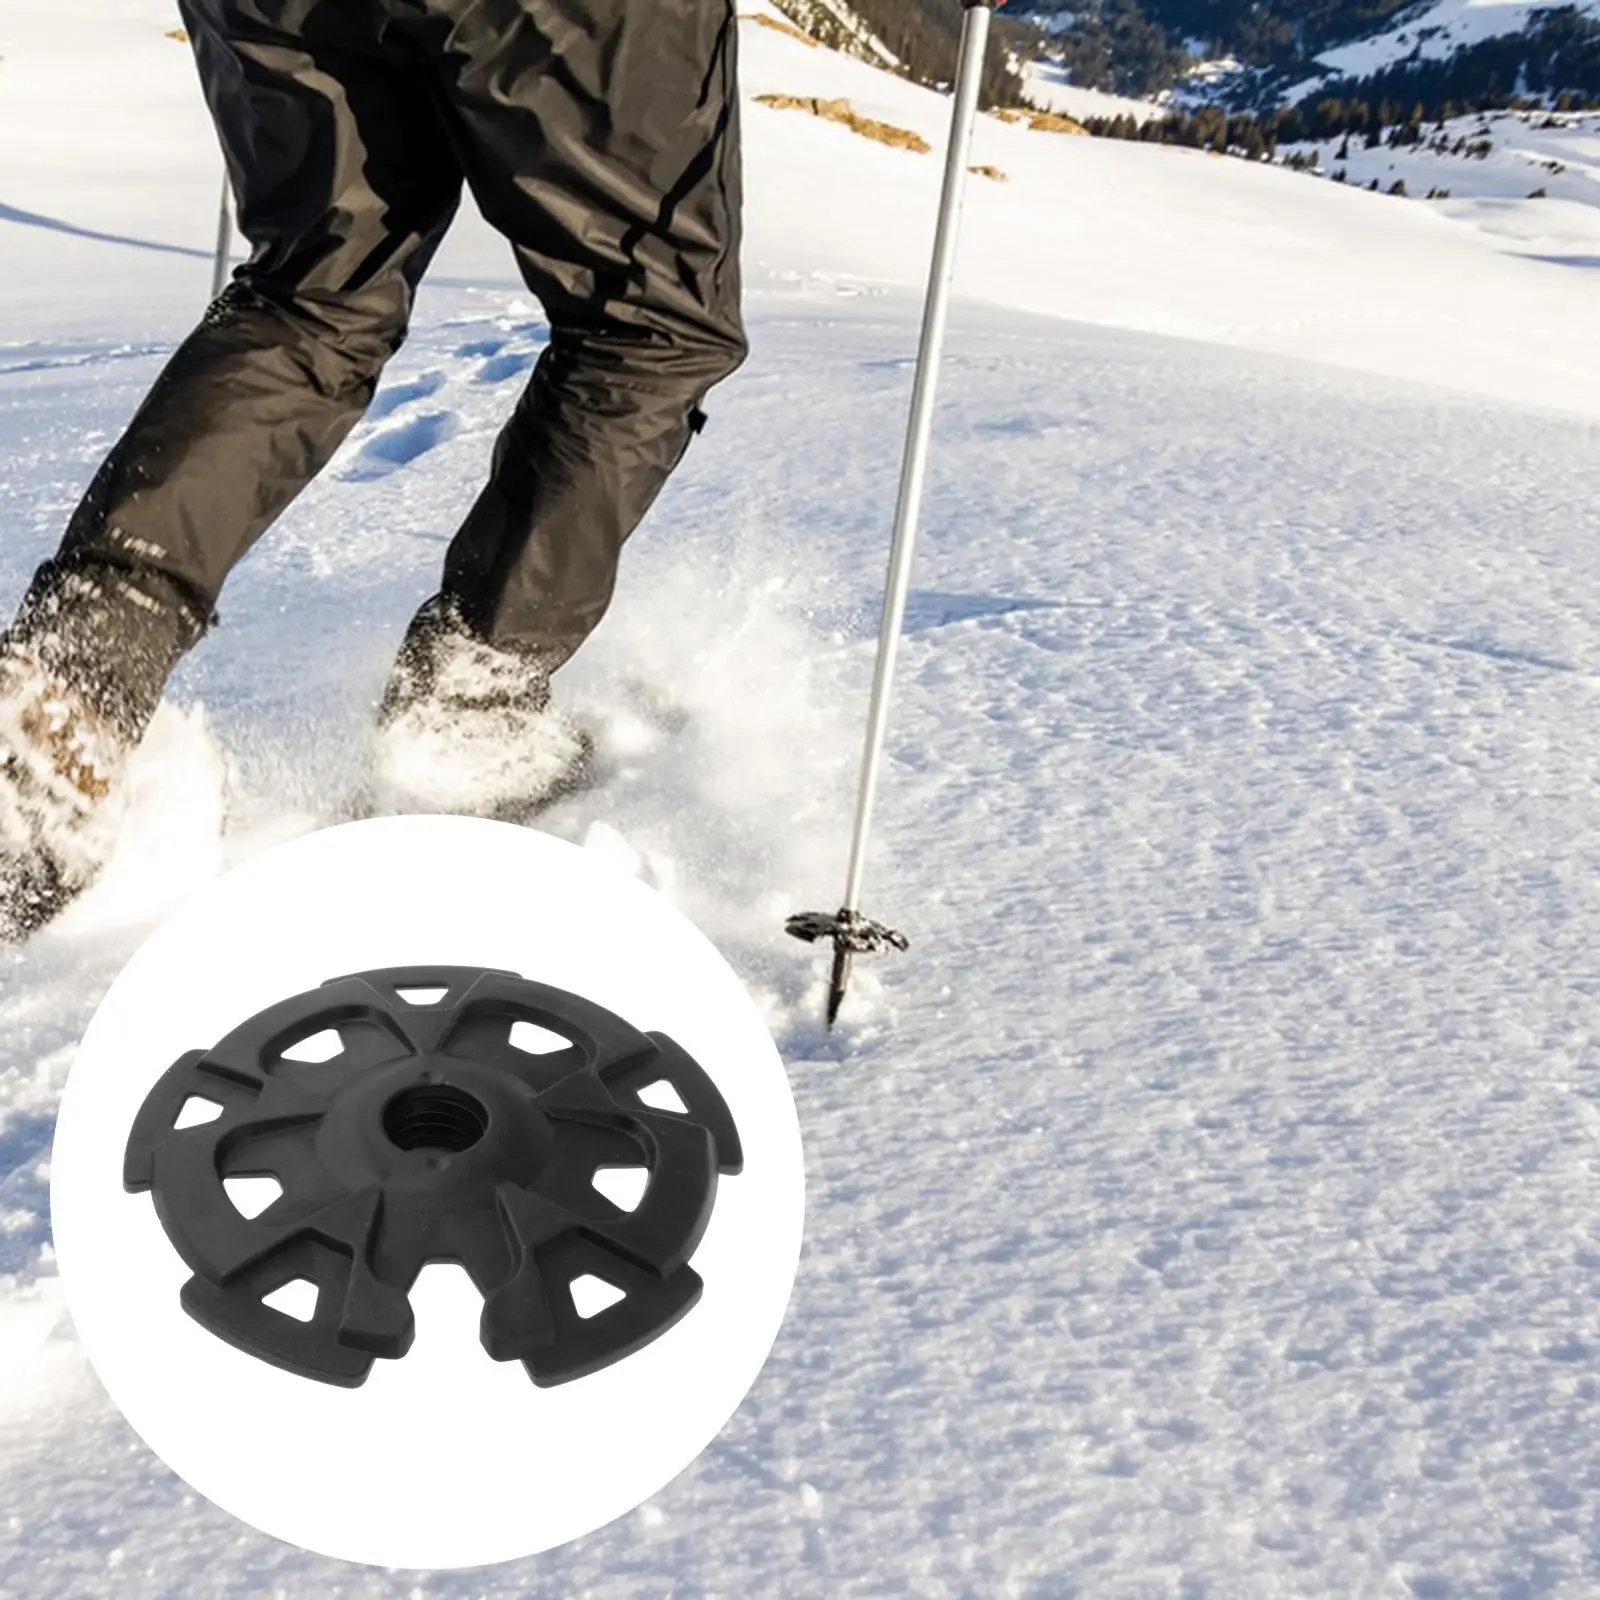 Walking Pole Snowflake Basket Removable Mud Ski Basket Replacement Accessory for Hiking Poles, 15mm Hole Diameter